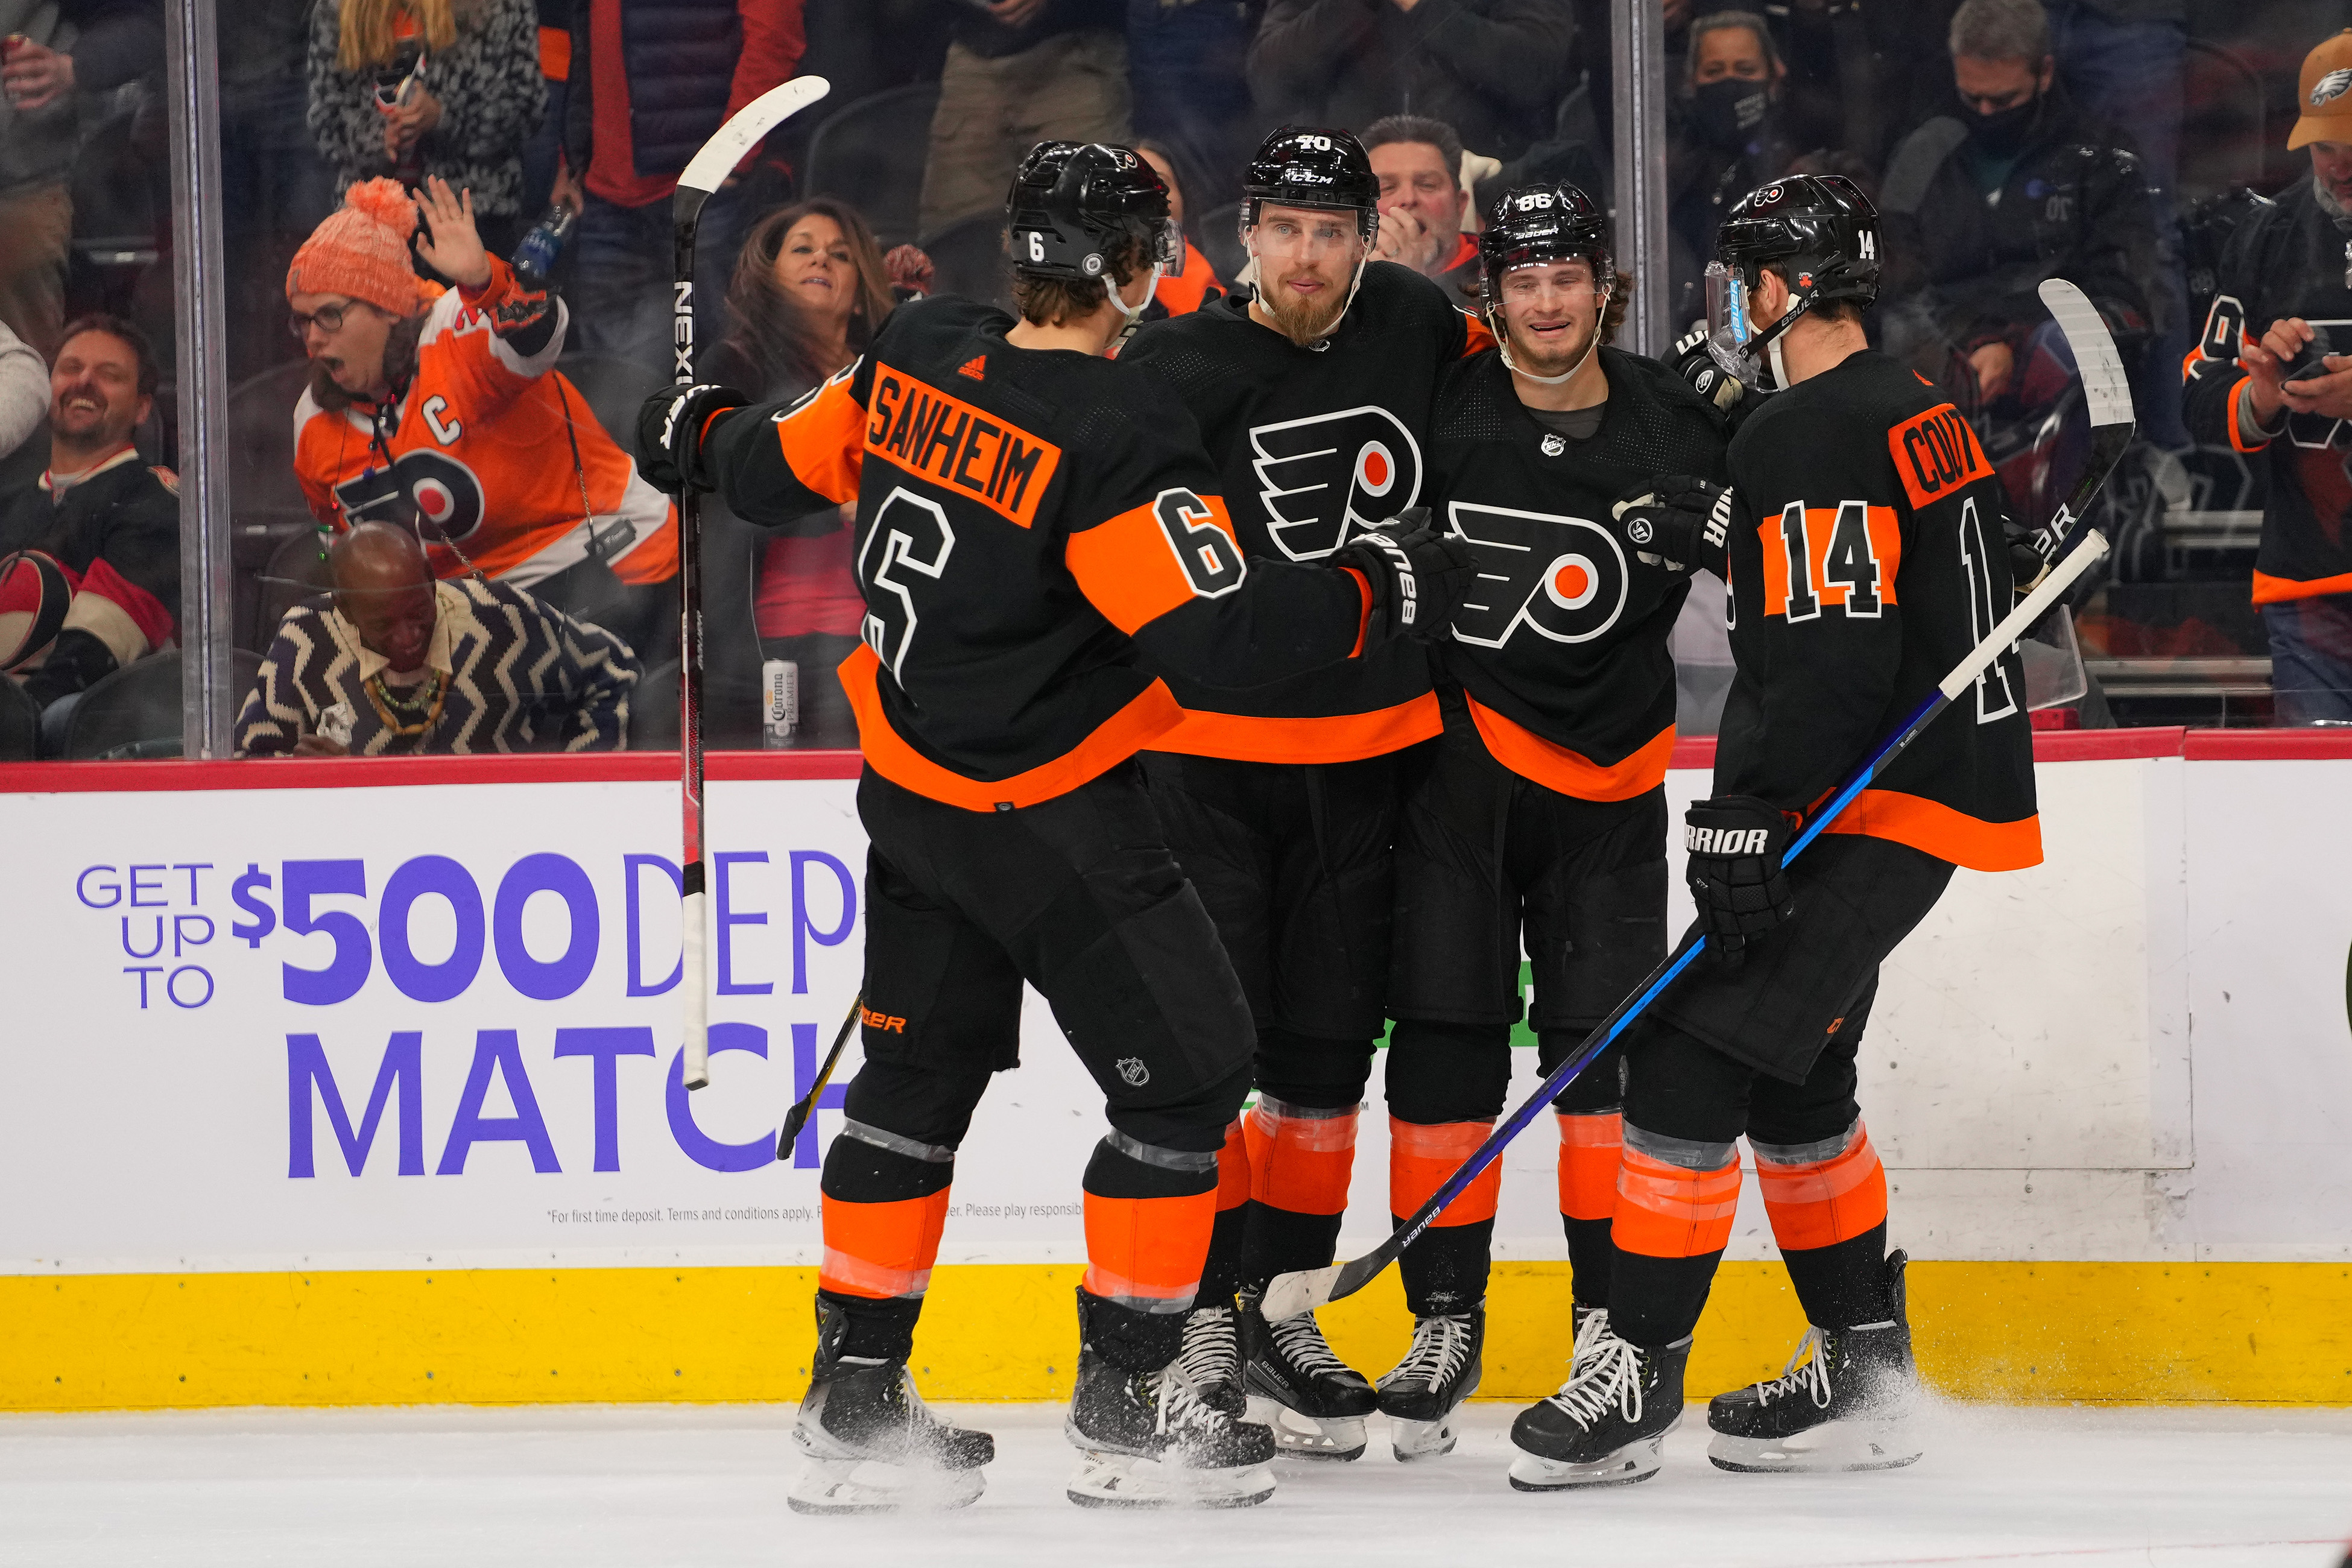 NHL Rumour: Philadelphia Flyers Forward Could Be Shipped Out